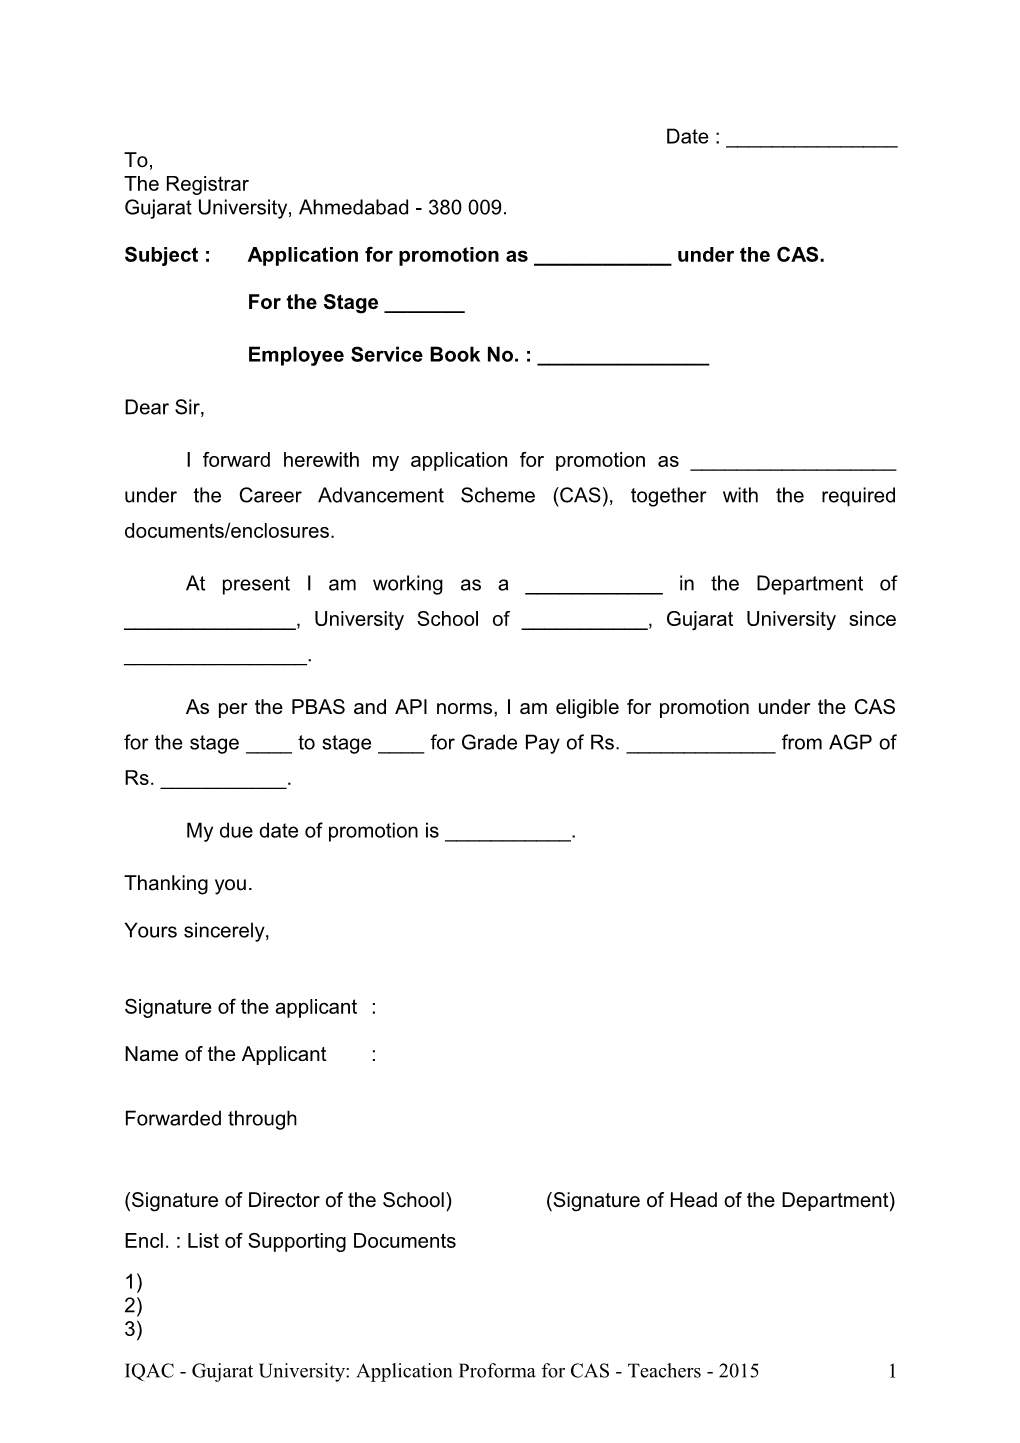 Subject:Application for Promotion As ______Under the CAS